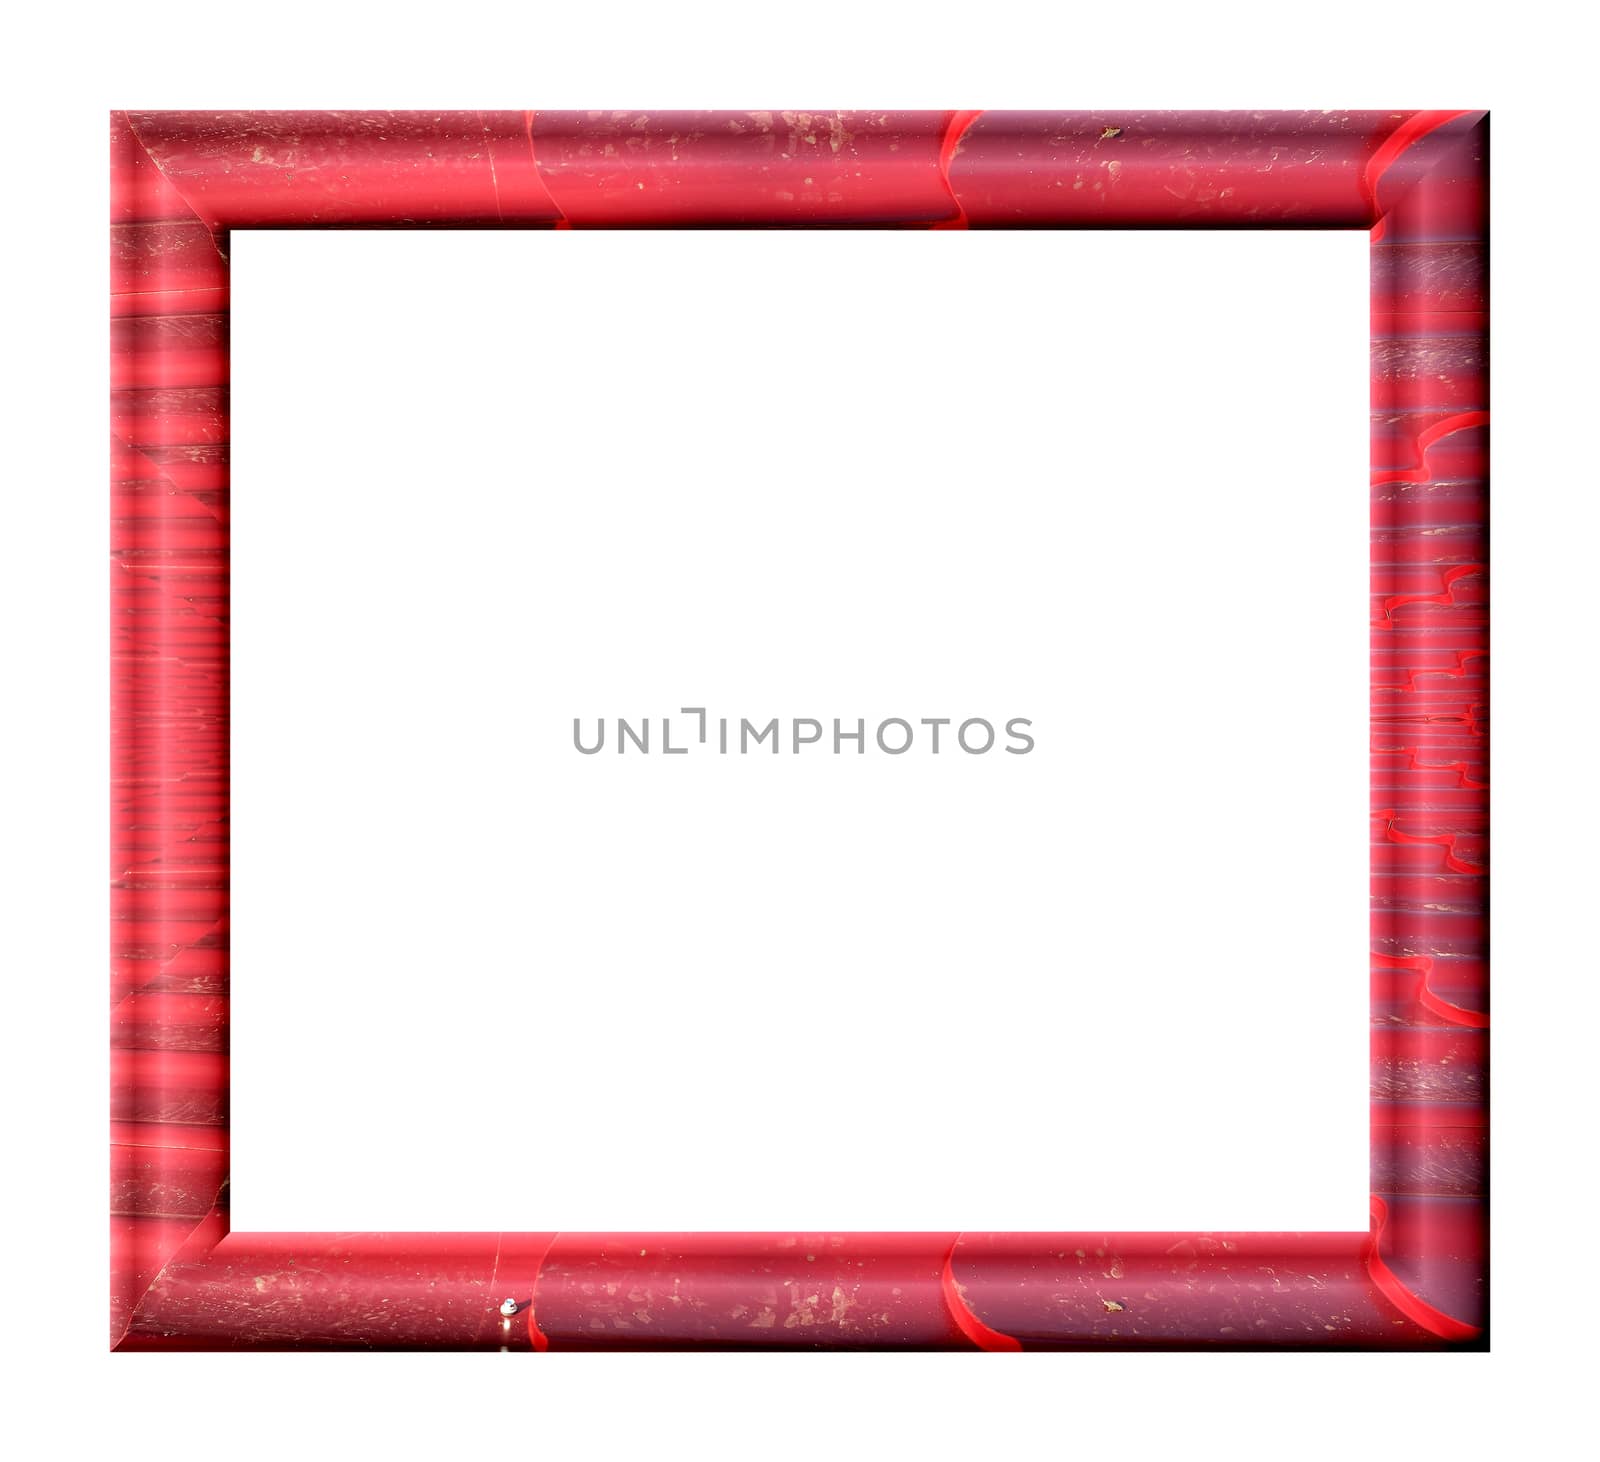 Convex rectangular frame red in grunge style on a white background